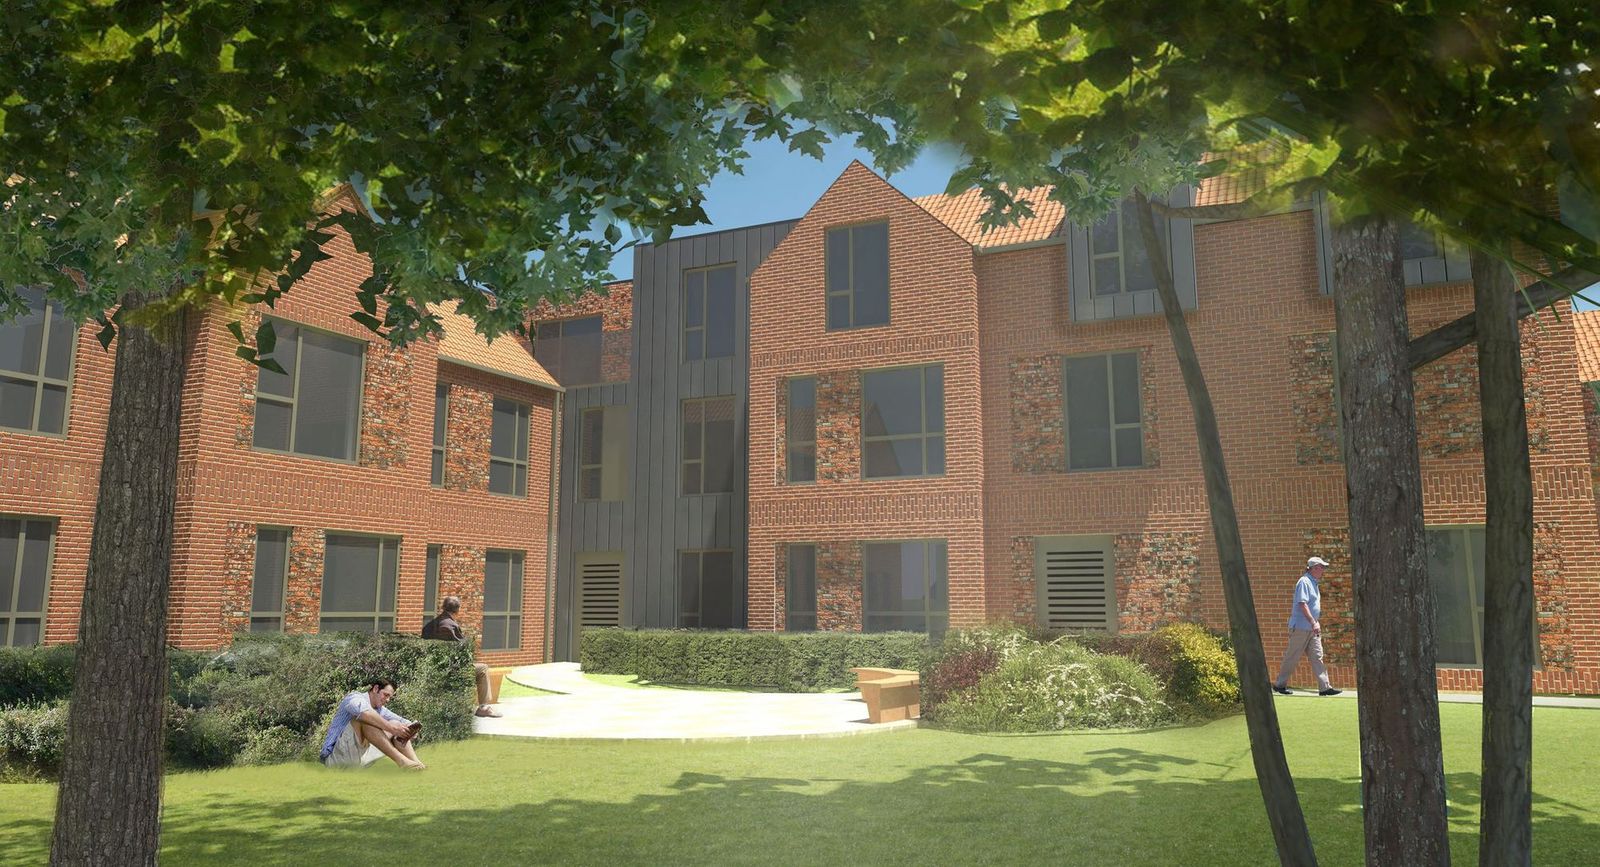 Work starts on building special homes for older people in York